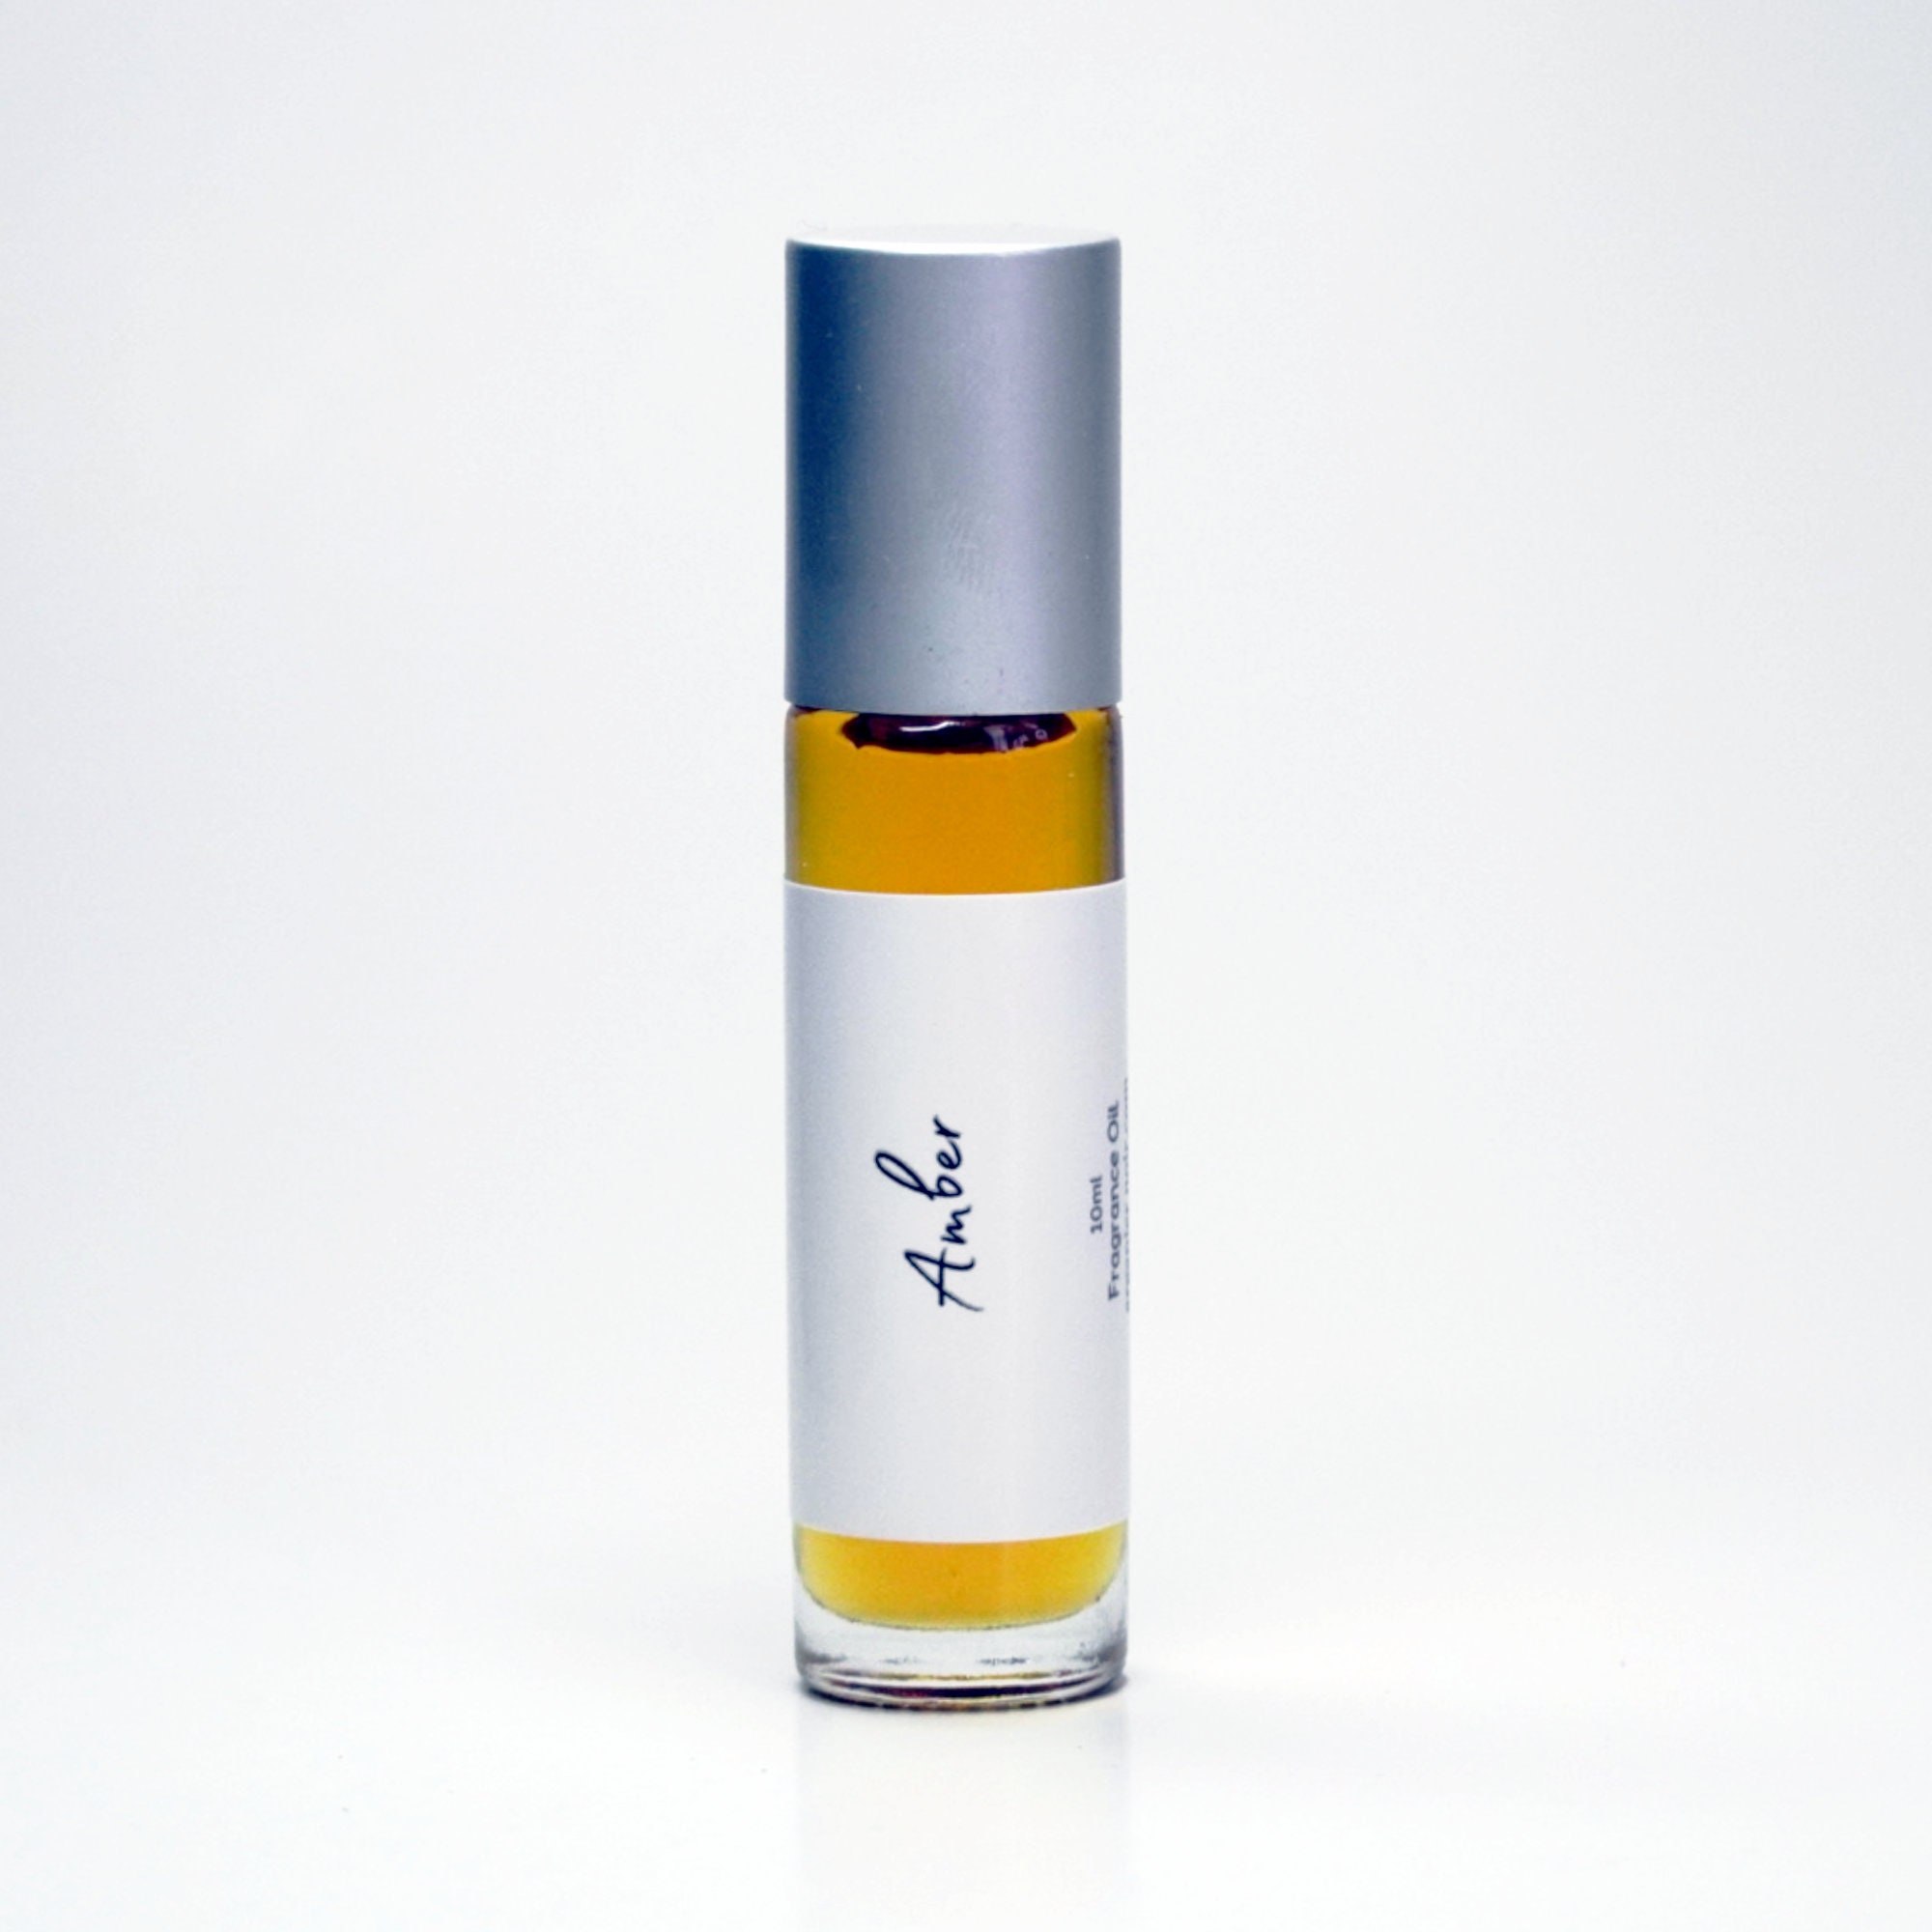 Amber Musk - Musk Amber - Attar - Concenrated Fragrance Oil - ITR - Alcohol  Free - Unisex - Import Oil